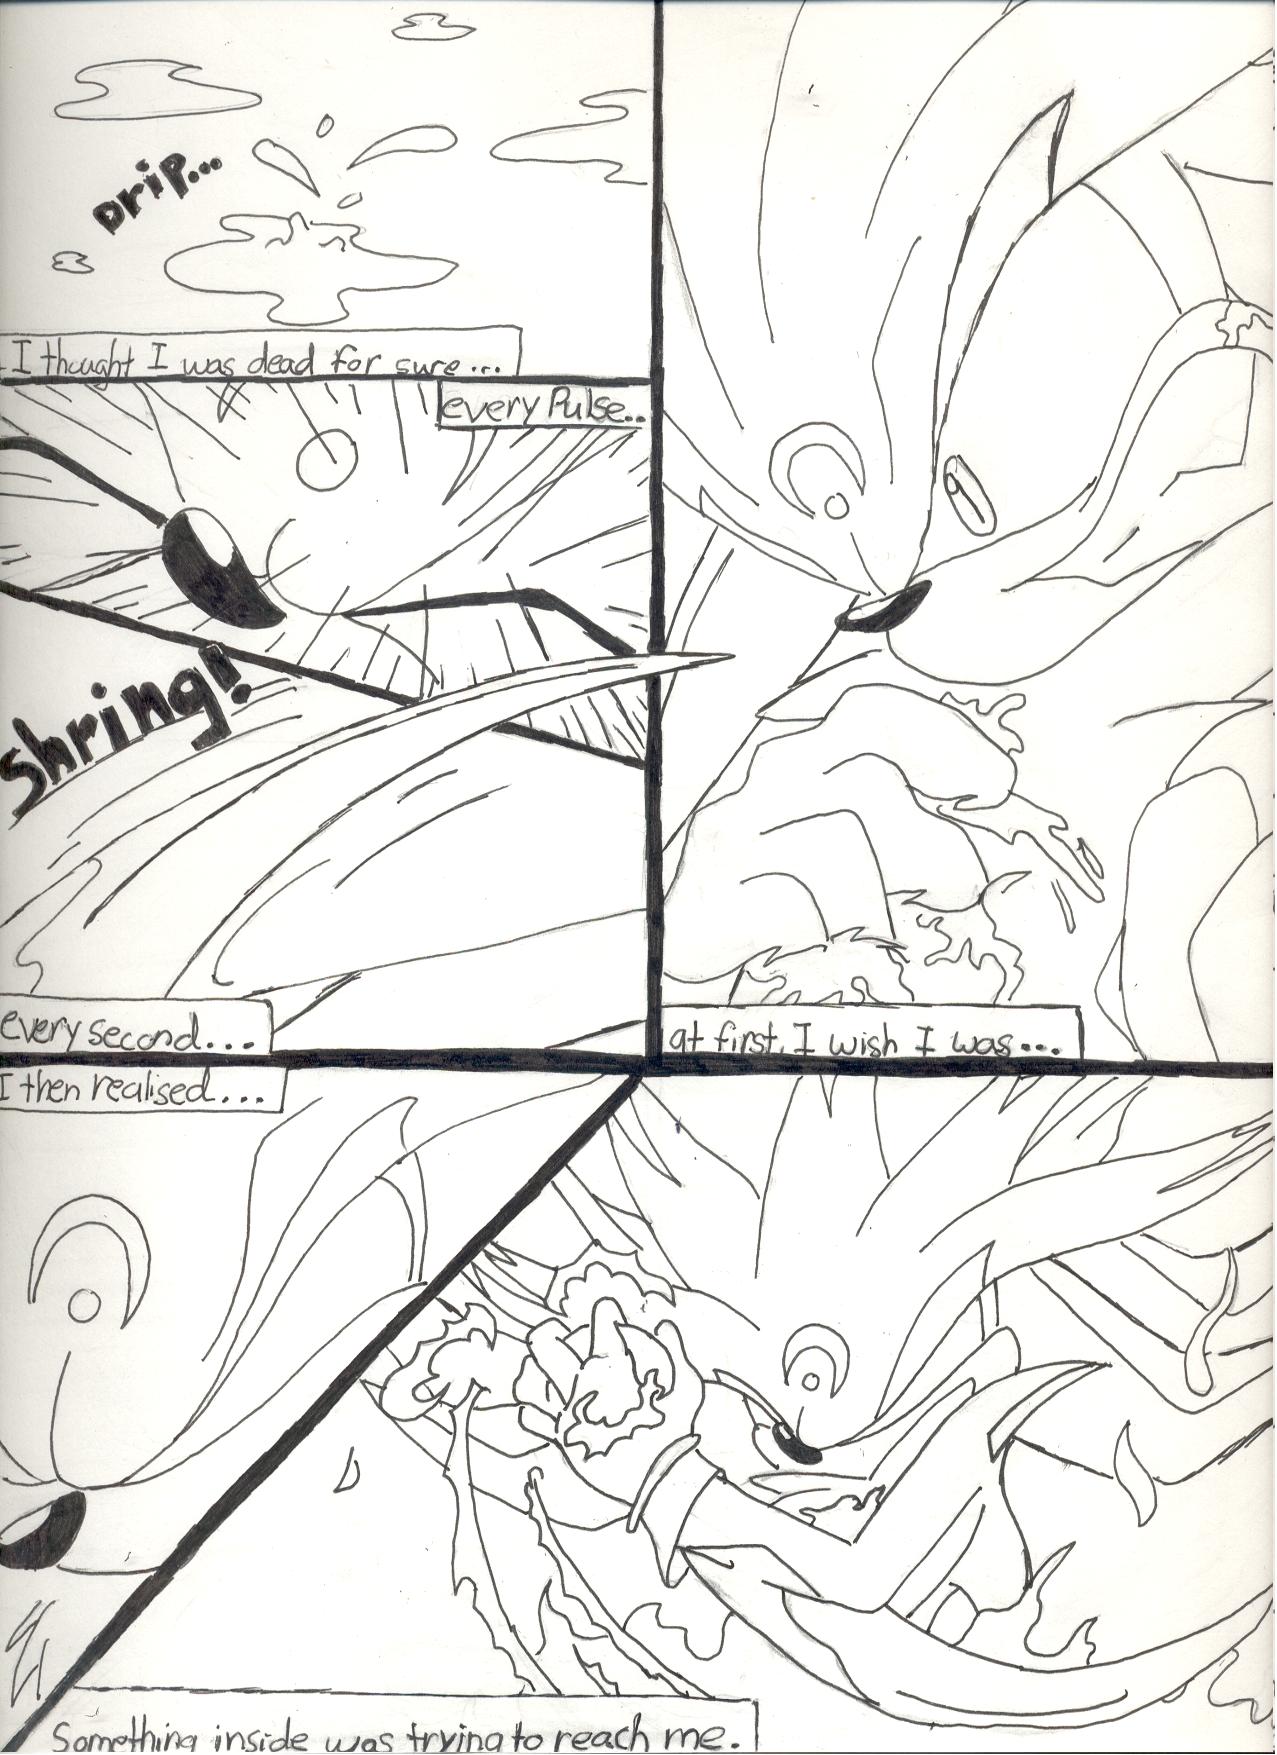 Strenght within part 2 outline by Nazo